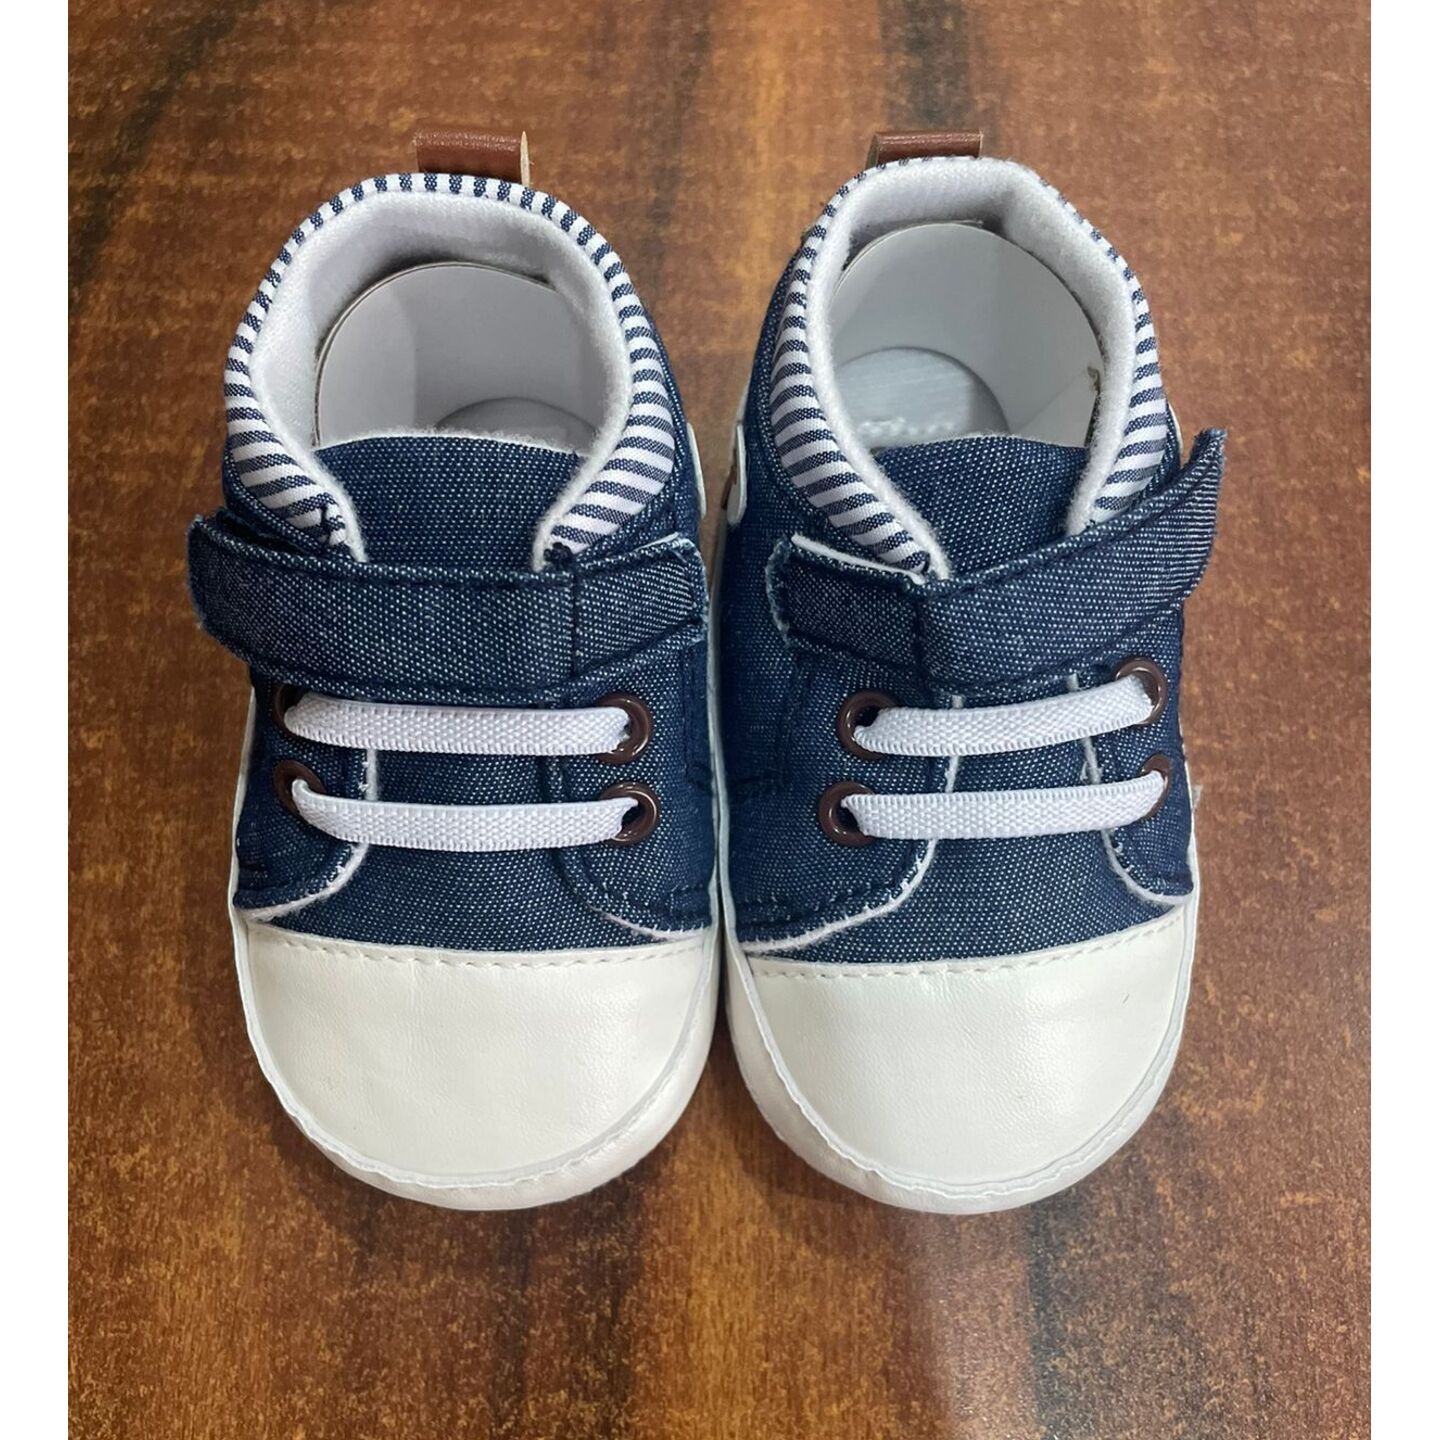 Mee Mee Baby Shoes 0 to 12 Months Blue and White